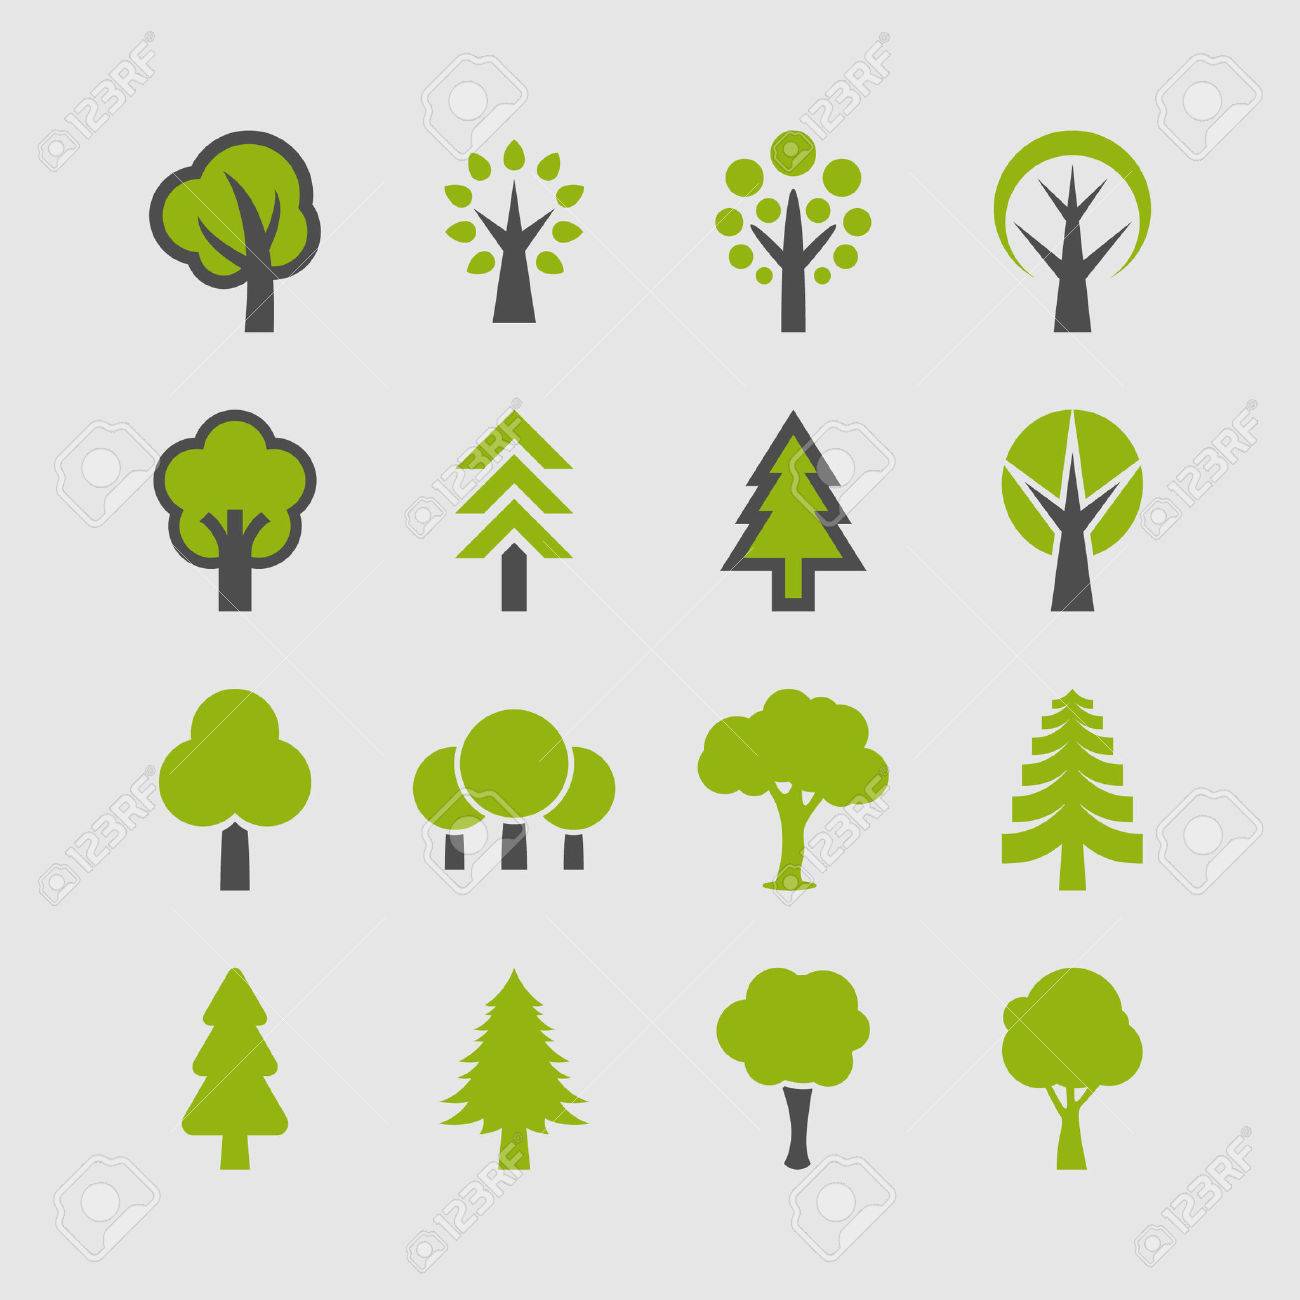 Small tree on ground - Free nature icons